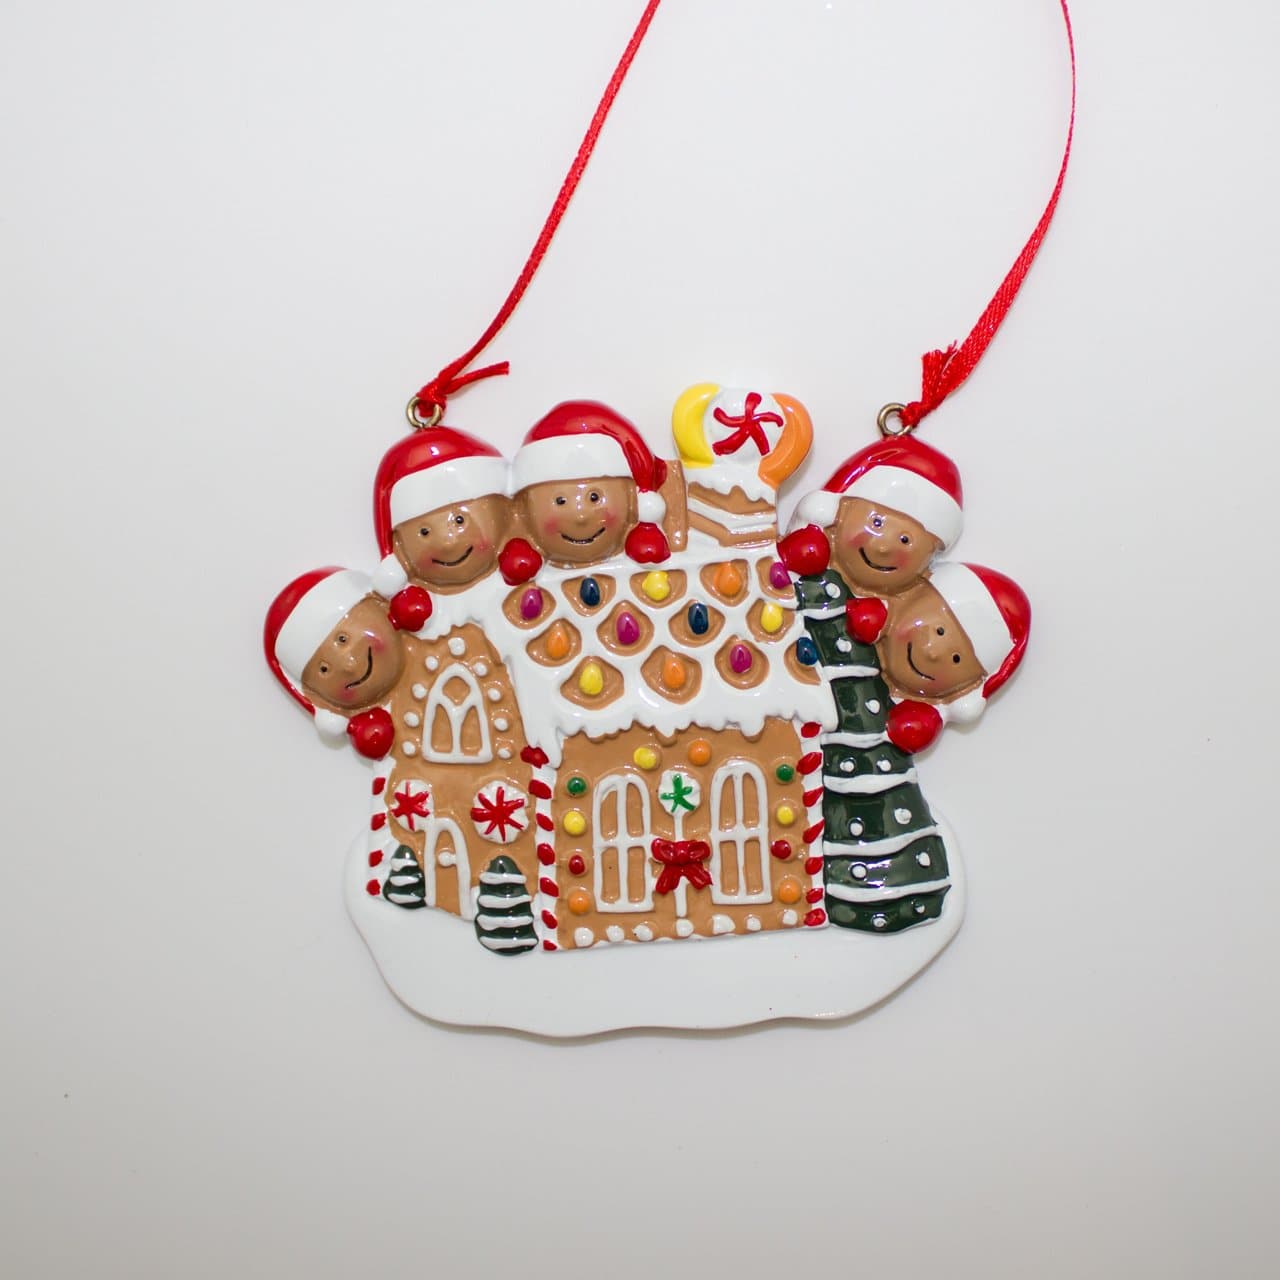 Gingerbread Man House - Christmas Ornament (Suitable for Personalization)